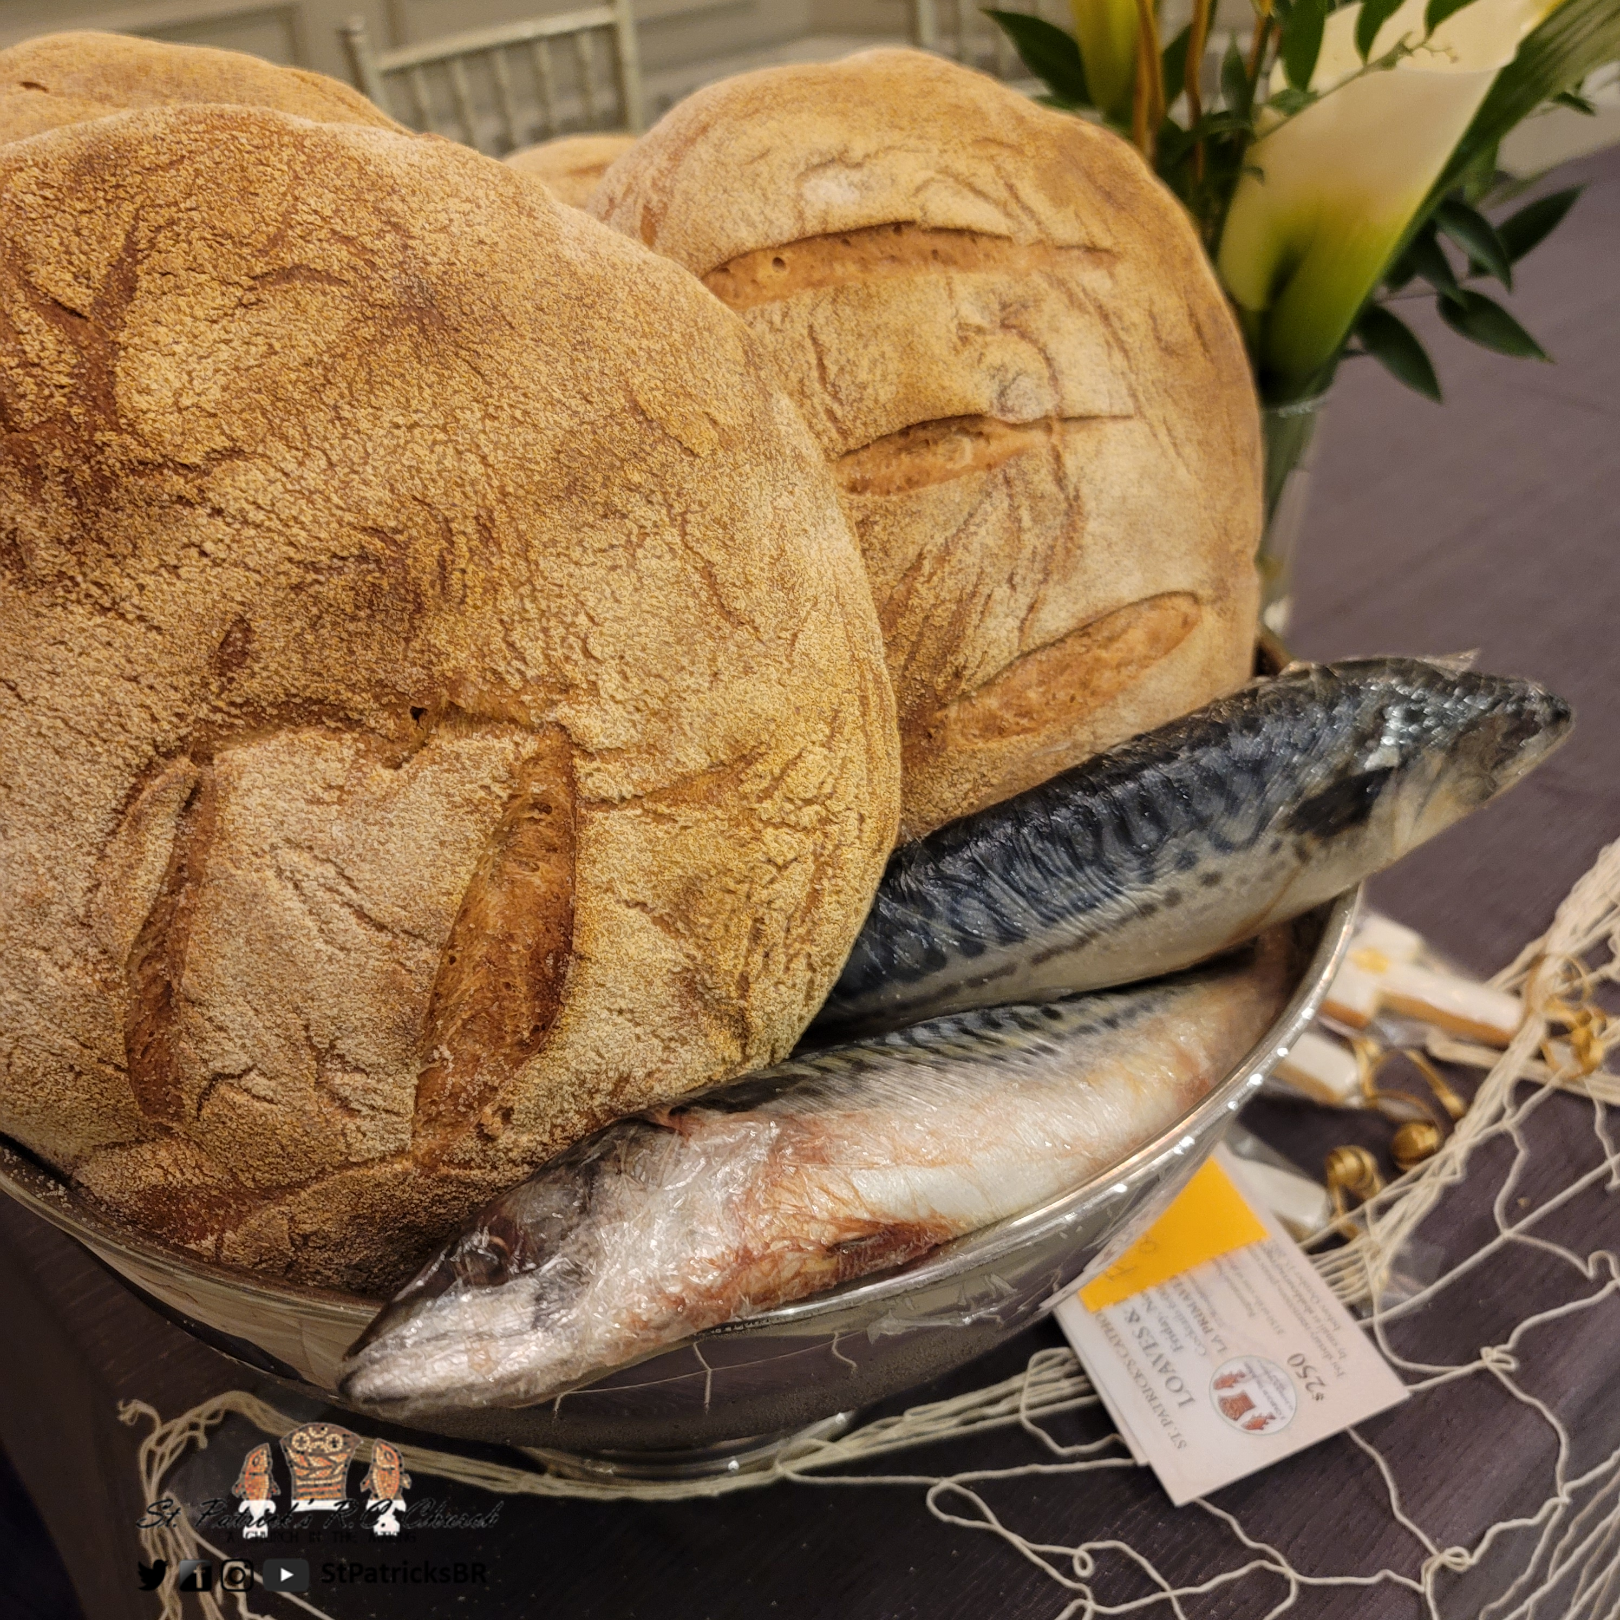 Display: Five Loaves and Two Fish